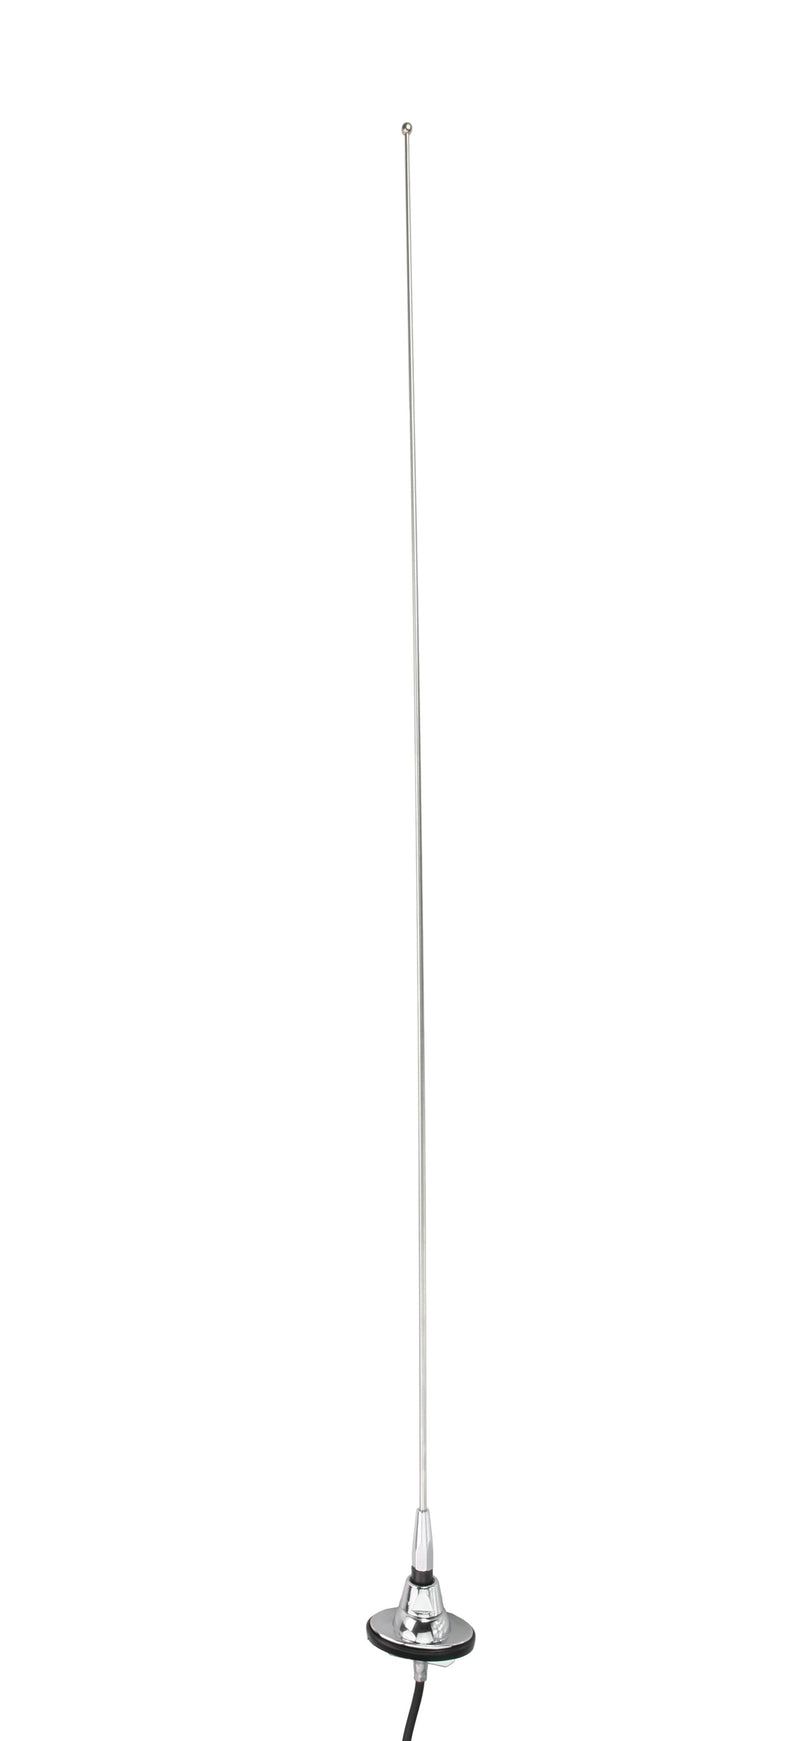 1986-92 Lincoln Mark VII Replacement Antenna